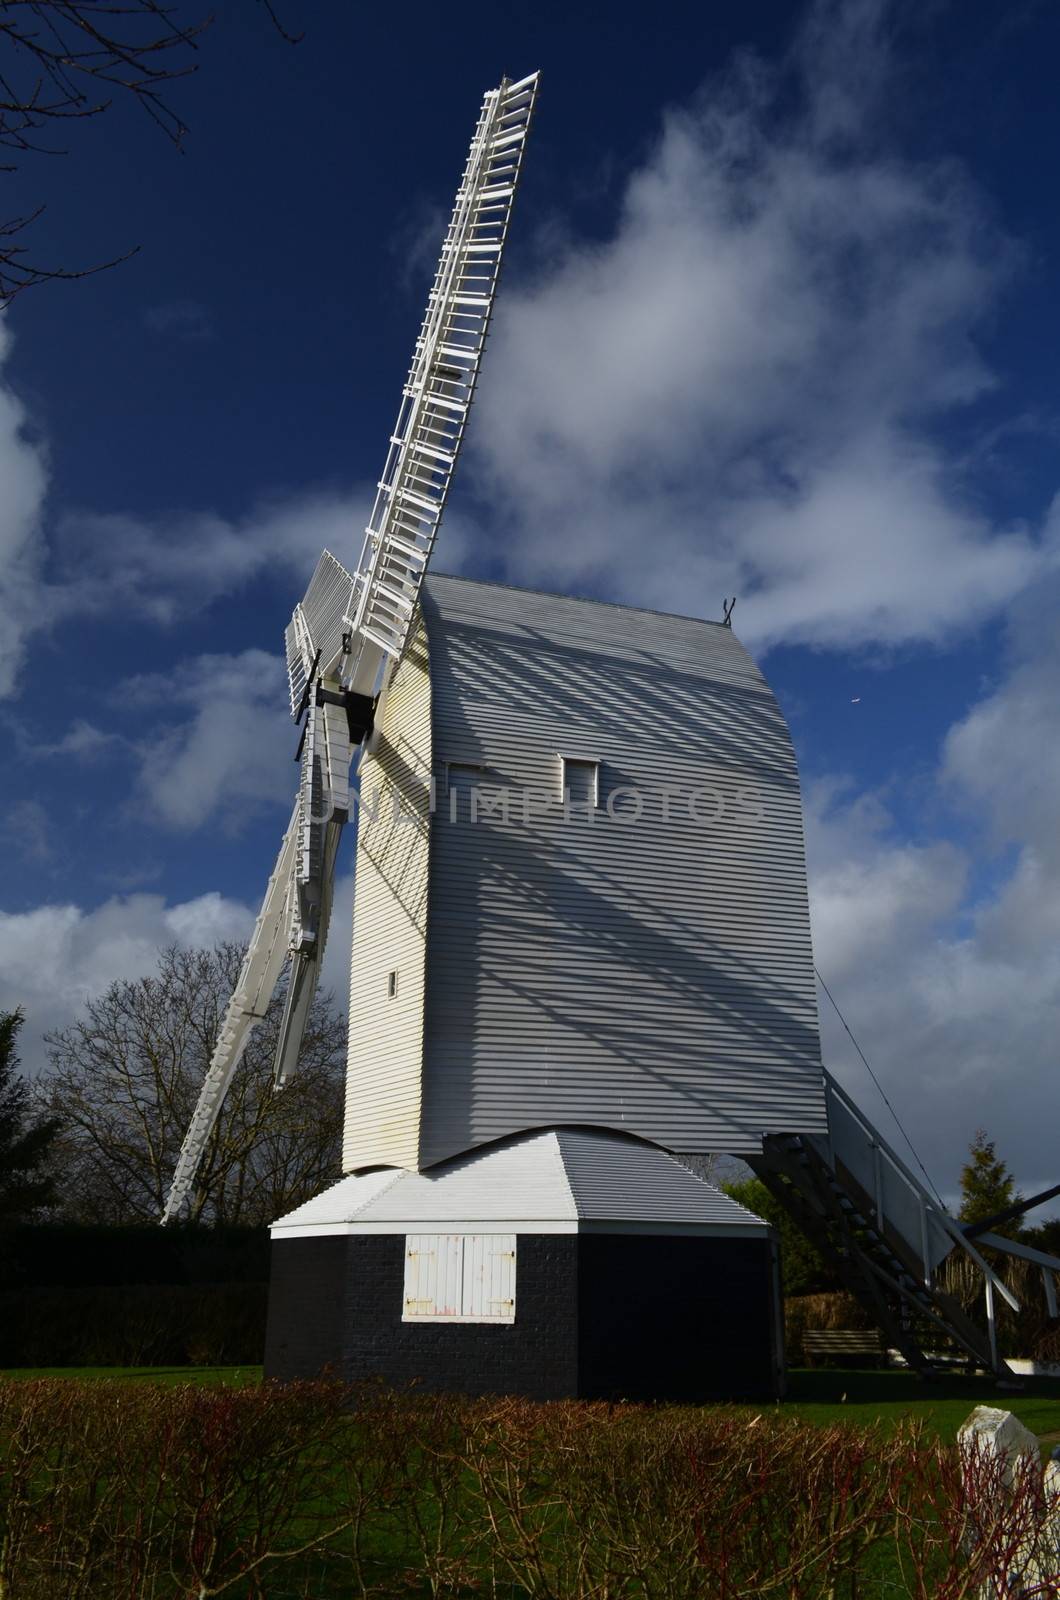 Oldland post mill was built in 1703 and is now restored to its former glory.Situated in the English County of Sussex at Keymer village.